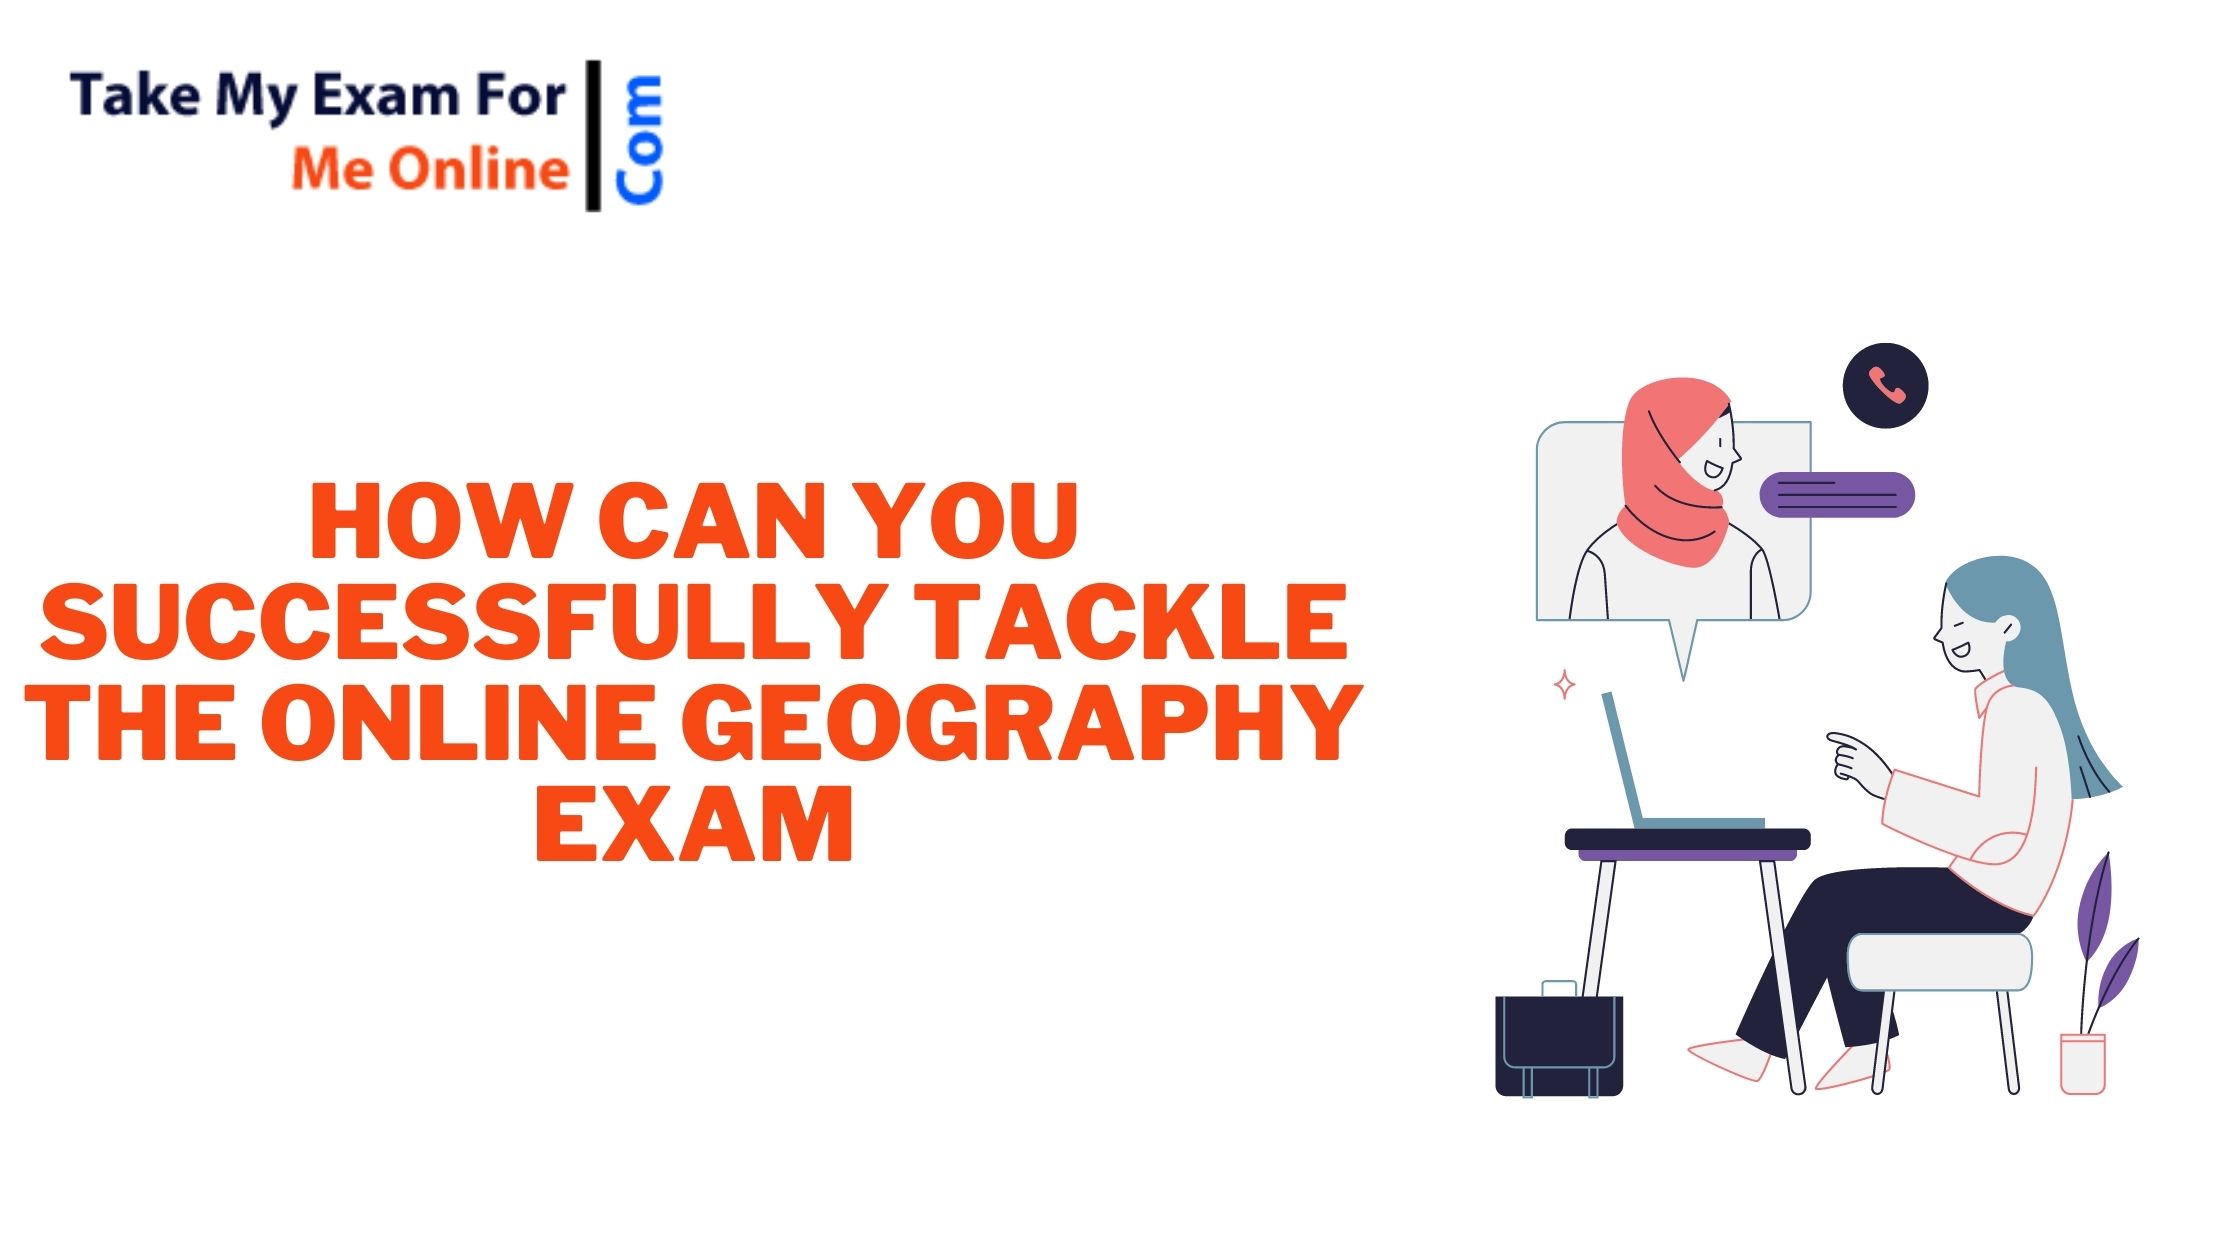 How can you successfully tackle the online geography exam